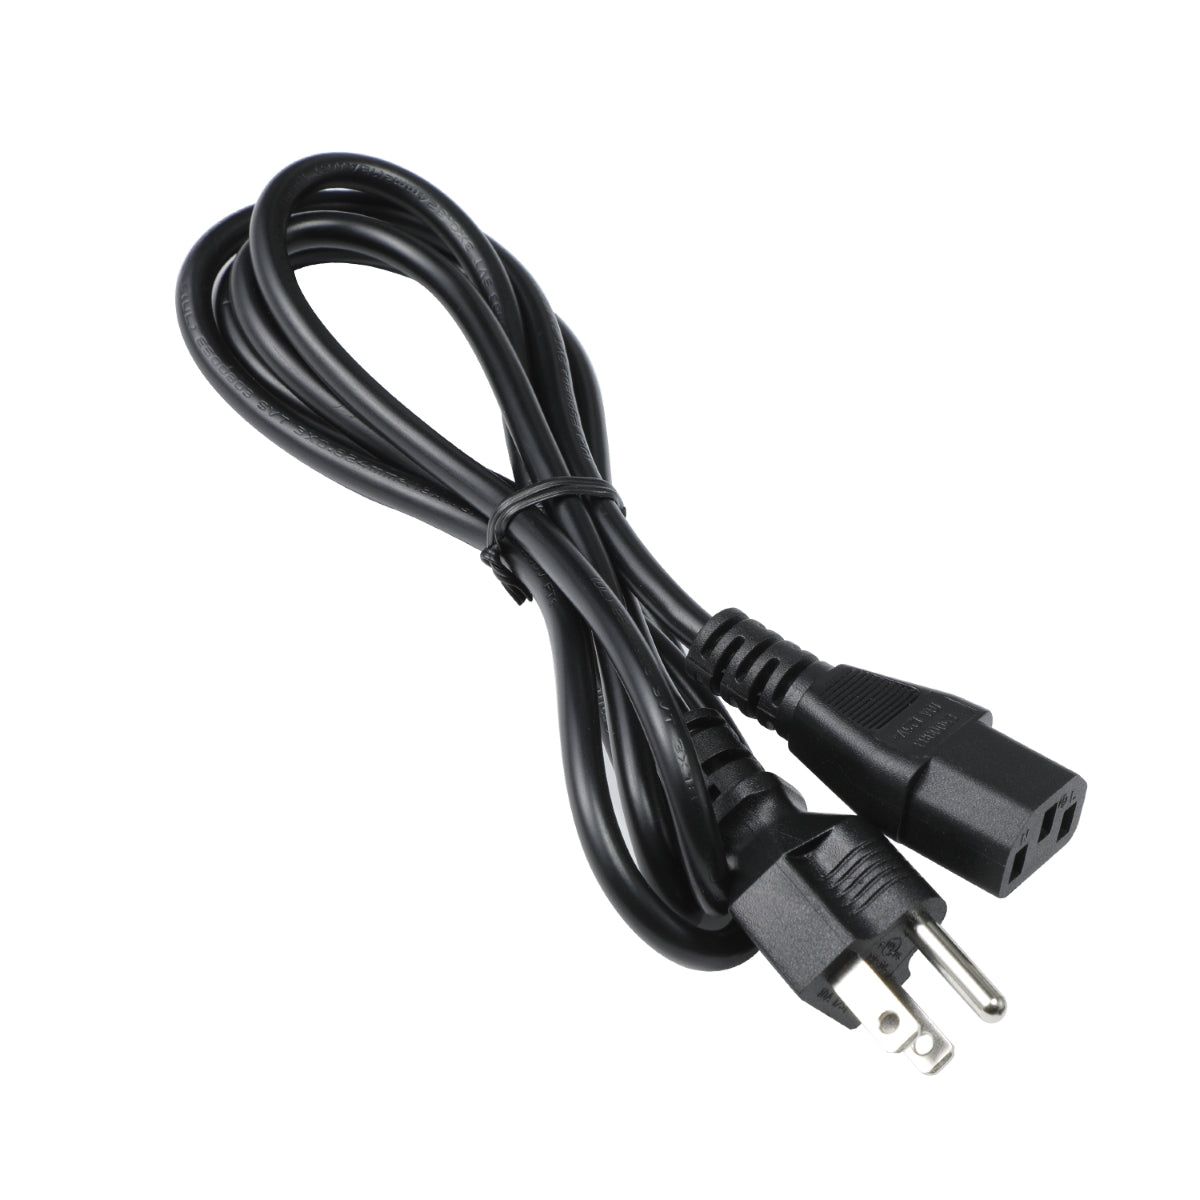 Power Cord for BenQ GW2475H IPS Monitor